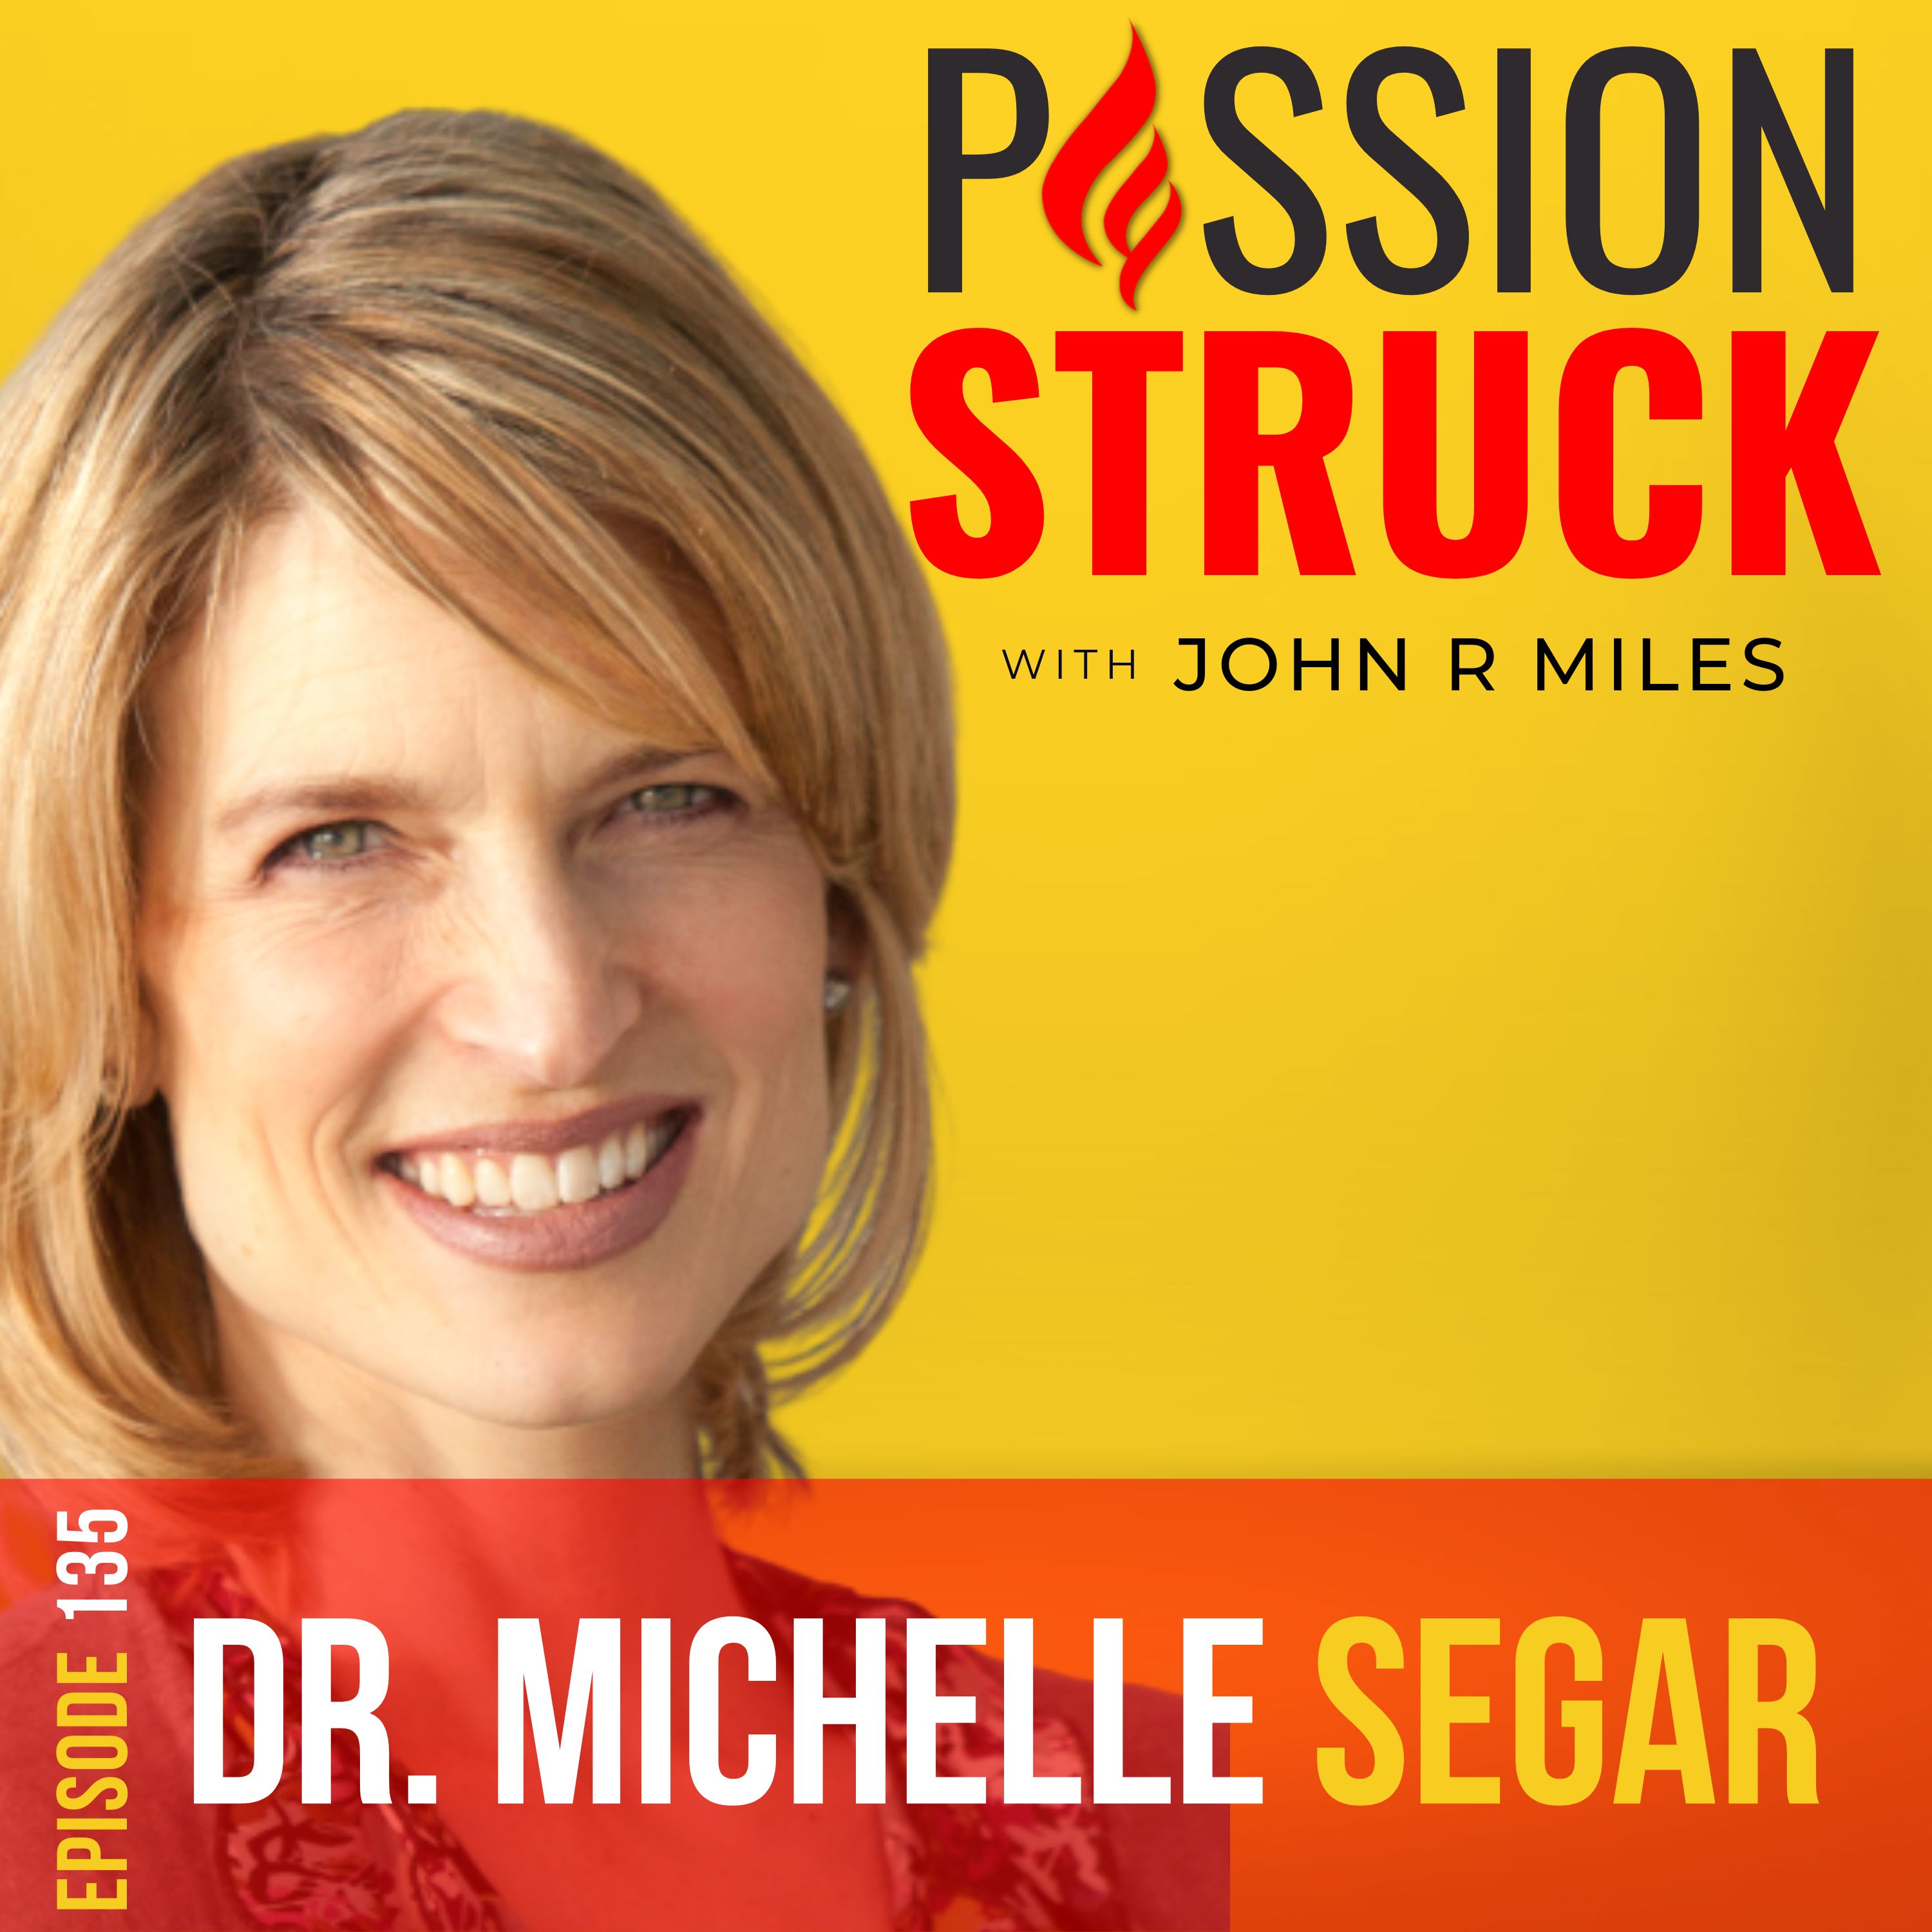 Passion Struck with John R. Miles thumbnail for episode 134 featuring Dr. Michelle Segar